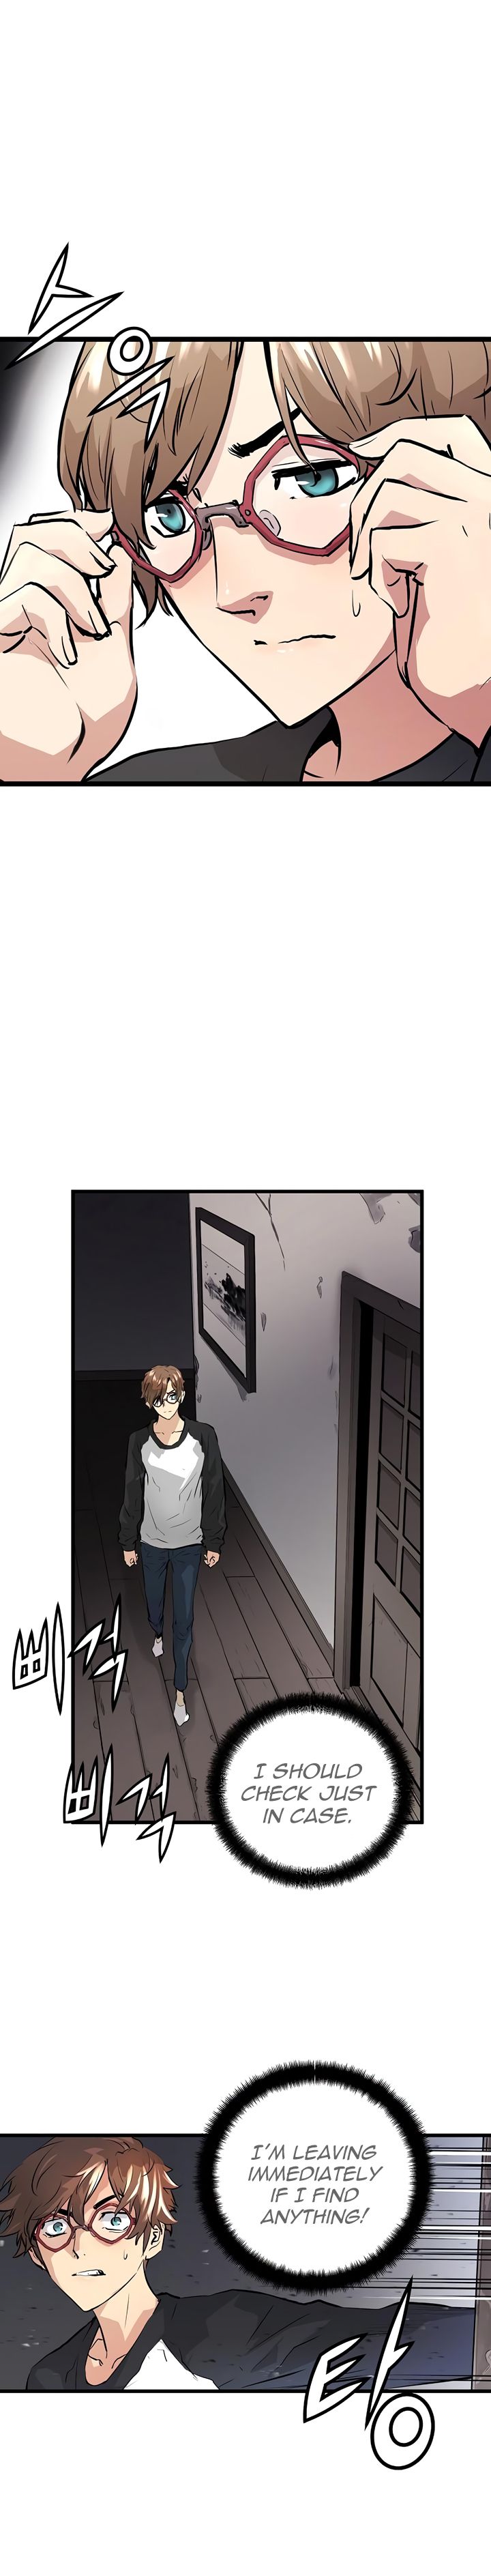 Read Manga PROMISED ORCHID - Chapter 1